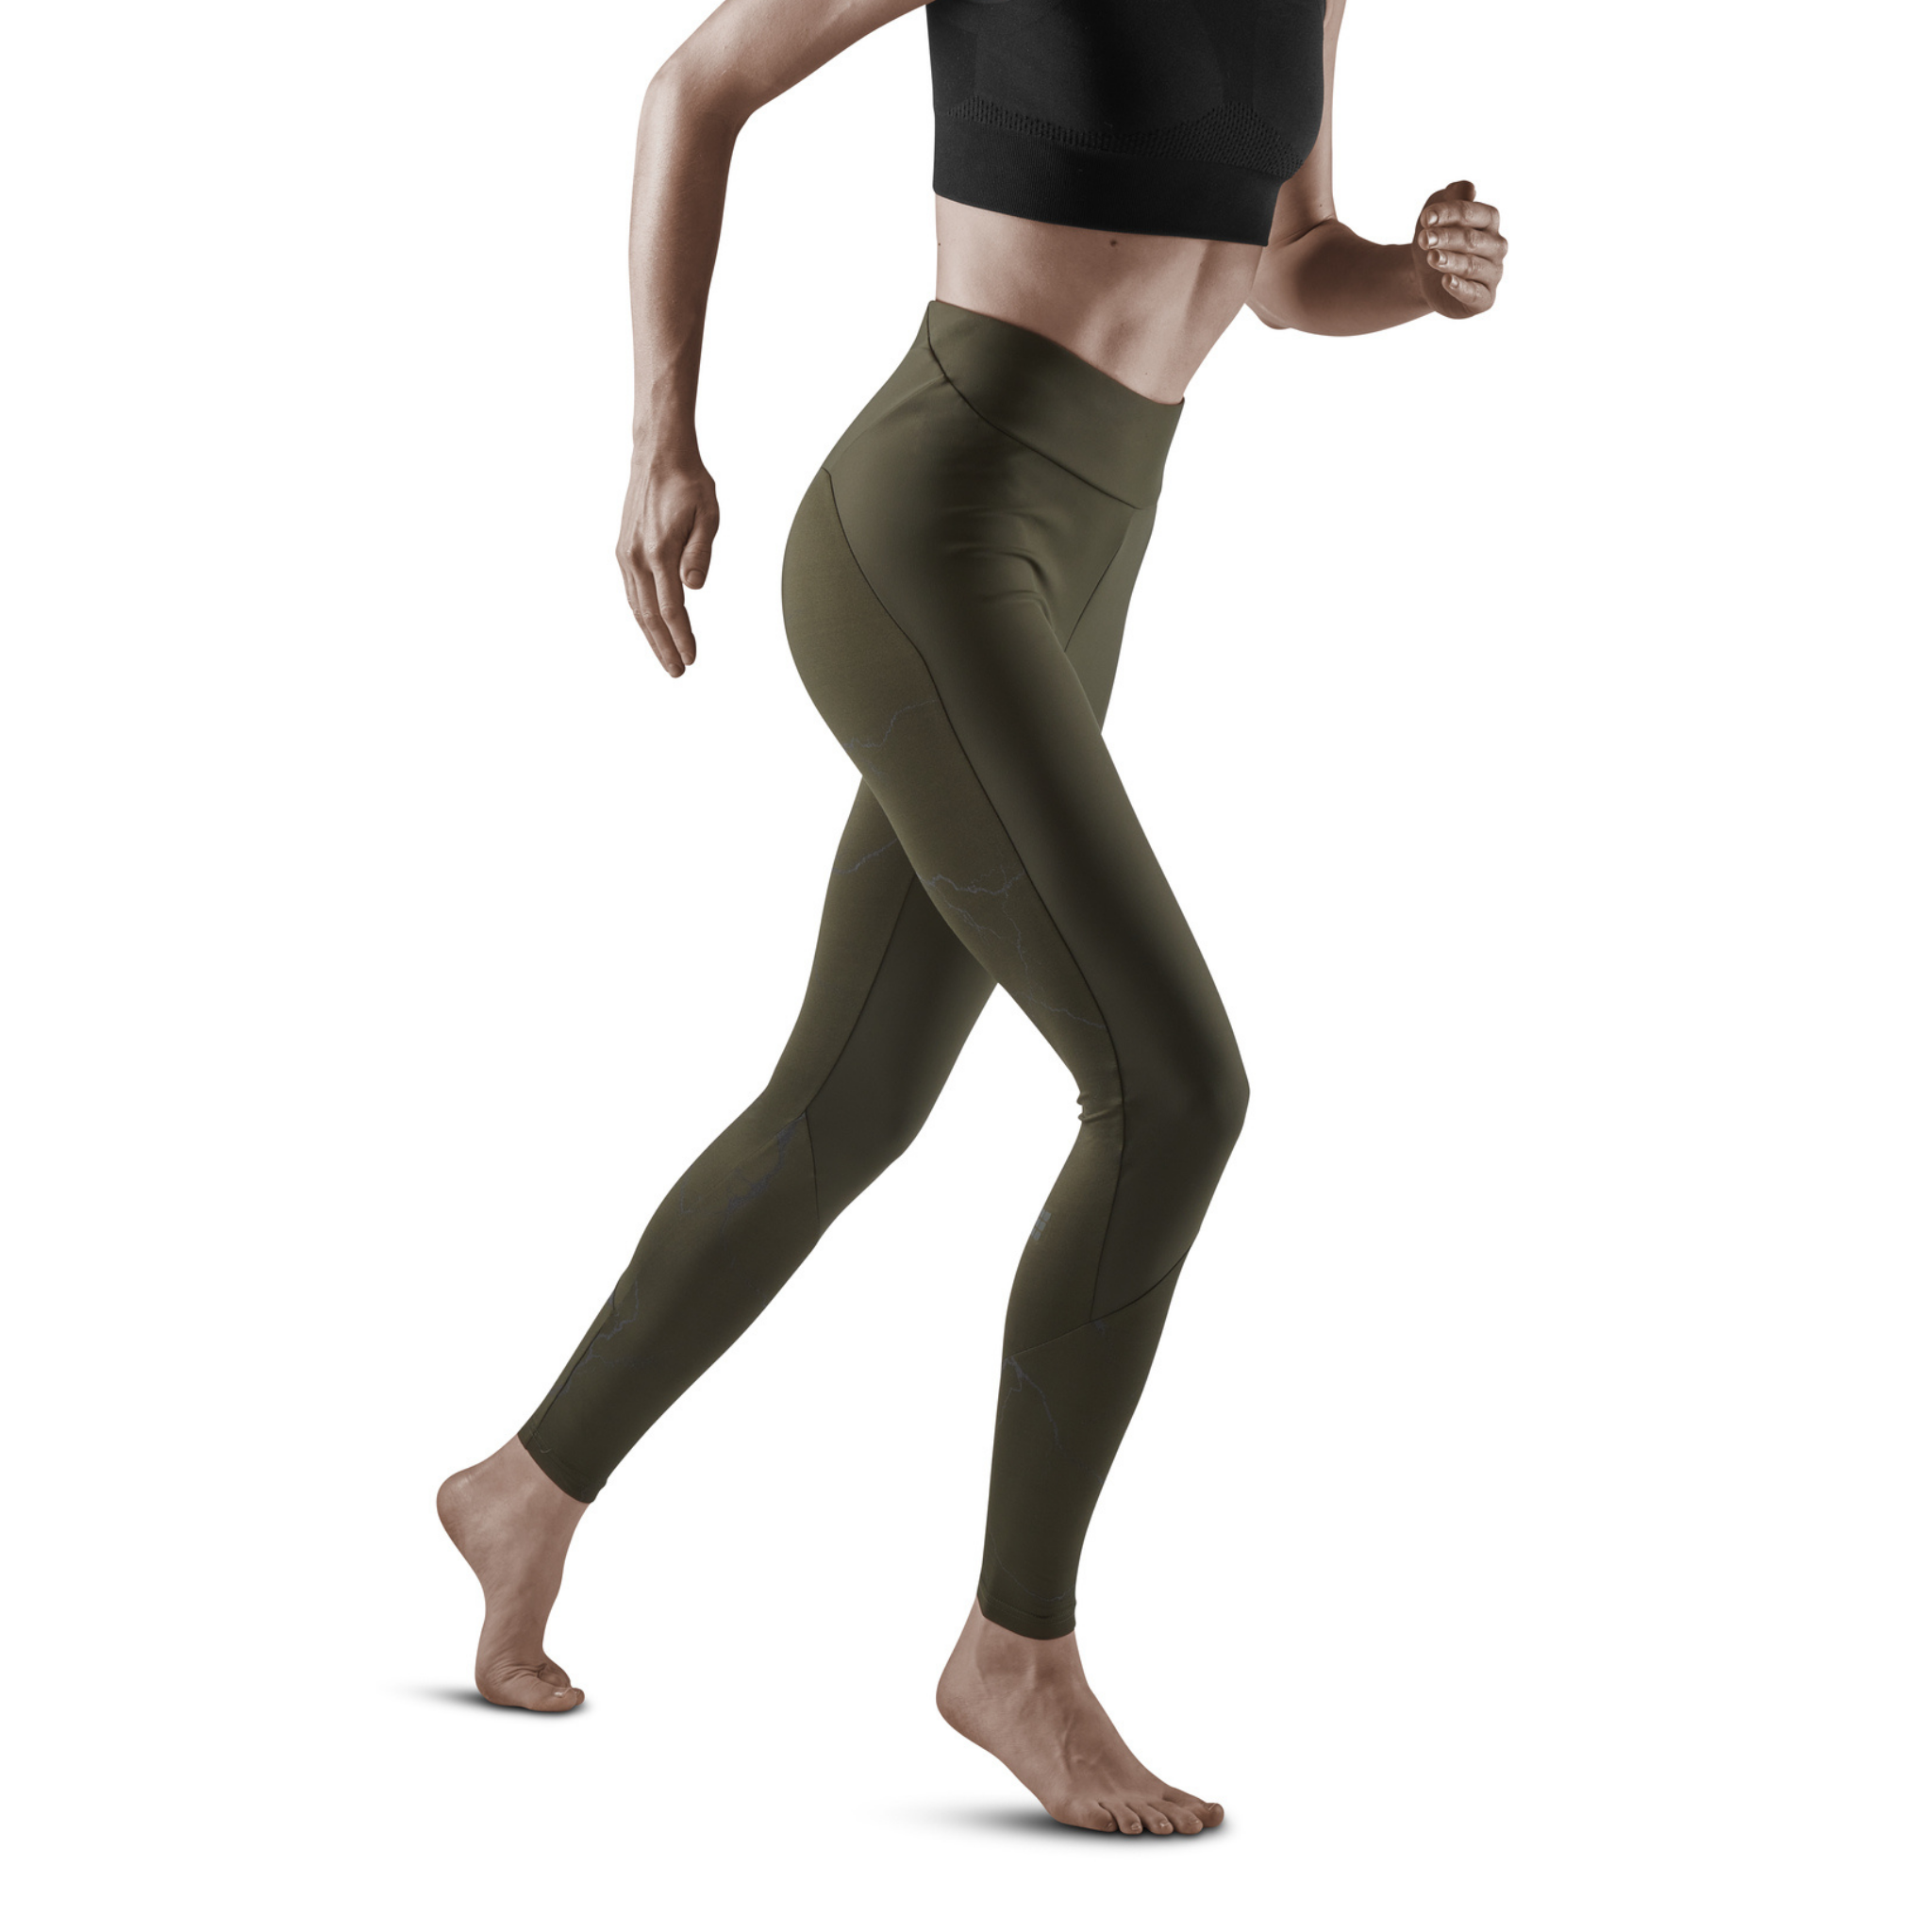 Satina Fleece Lined Leggings High Waist Compression Slimming Warm Opaque  Tights (One Size, Olive) 